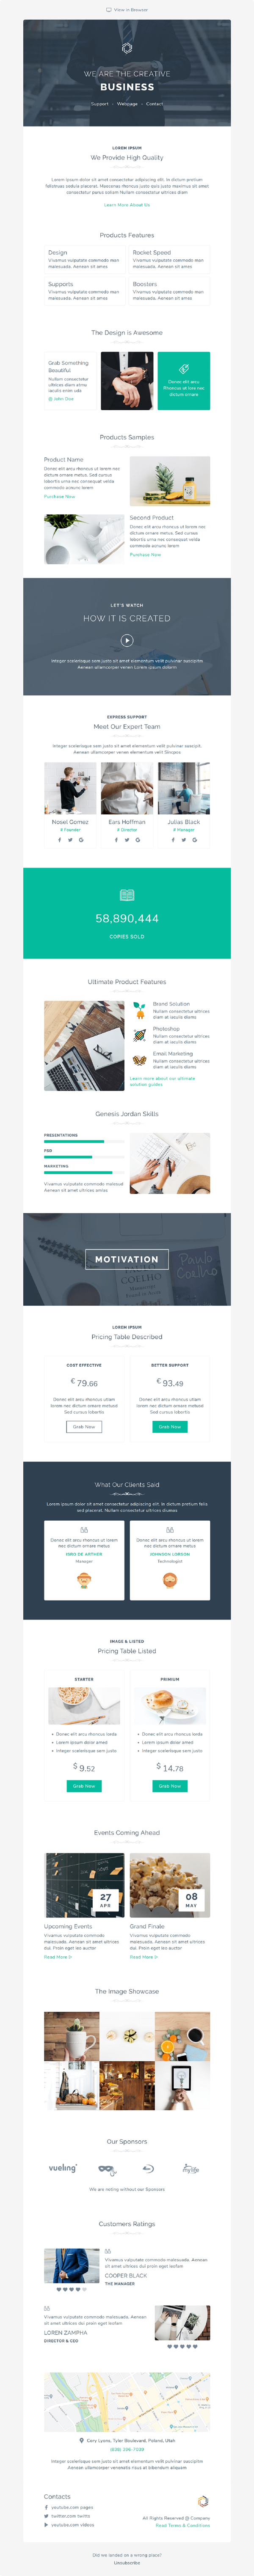 Mzone Responsive Newsletter Email Template For Business - 8